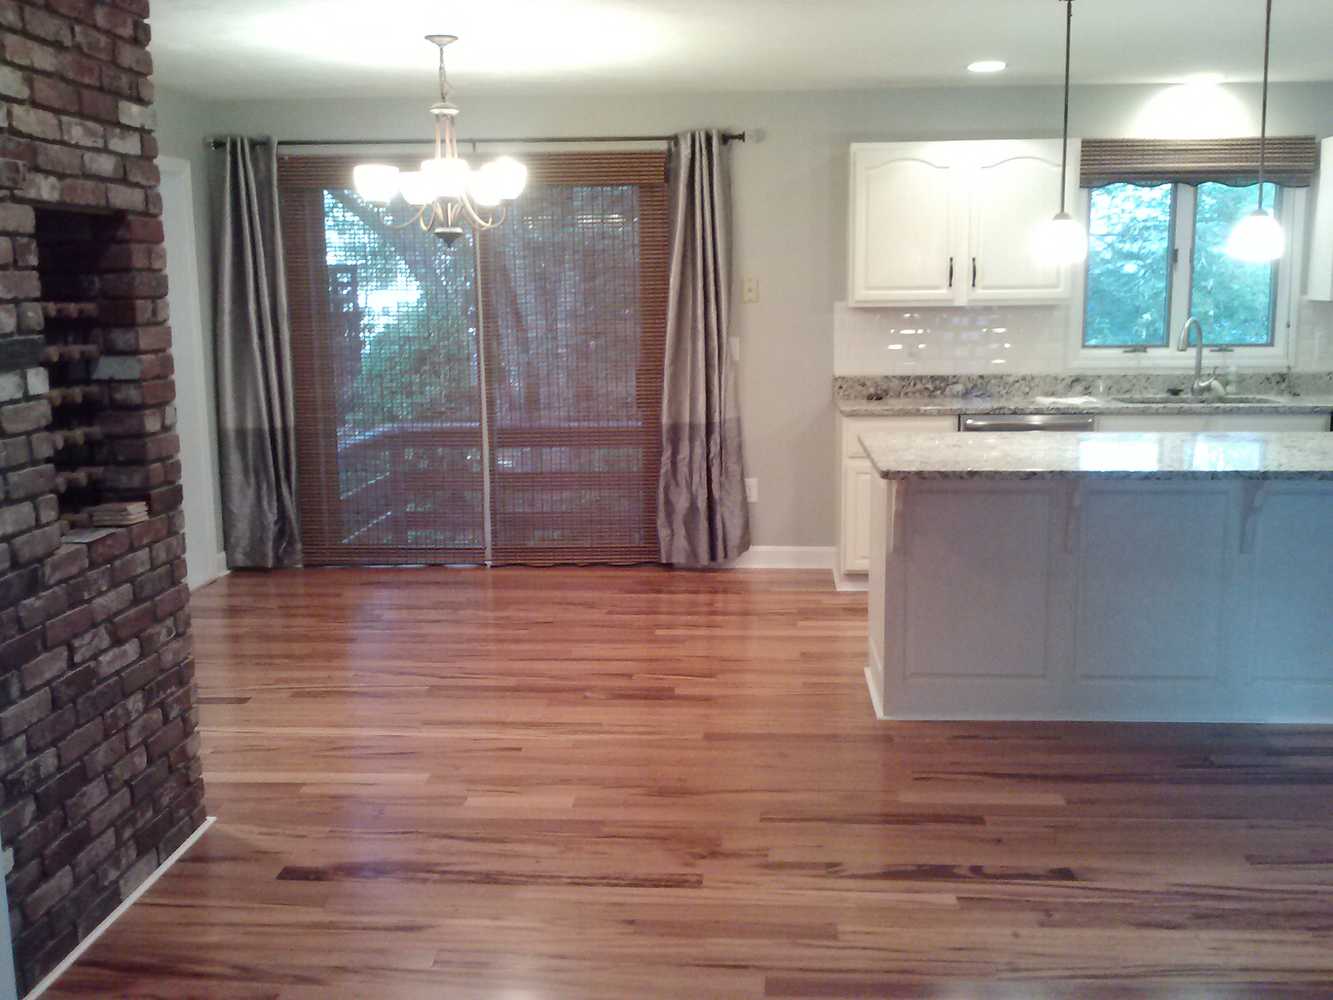 Installed Pre-Finished Hardwood Flooring (Bellawood Brazilian Koa) that our client purchased at Lumber Liquidators